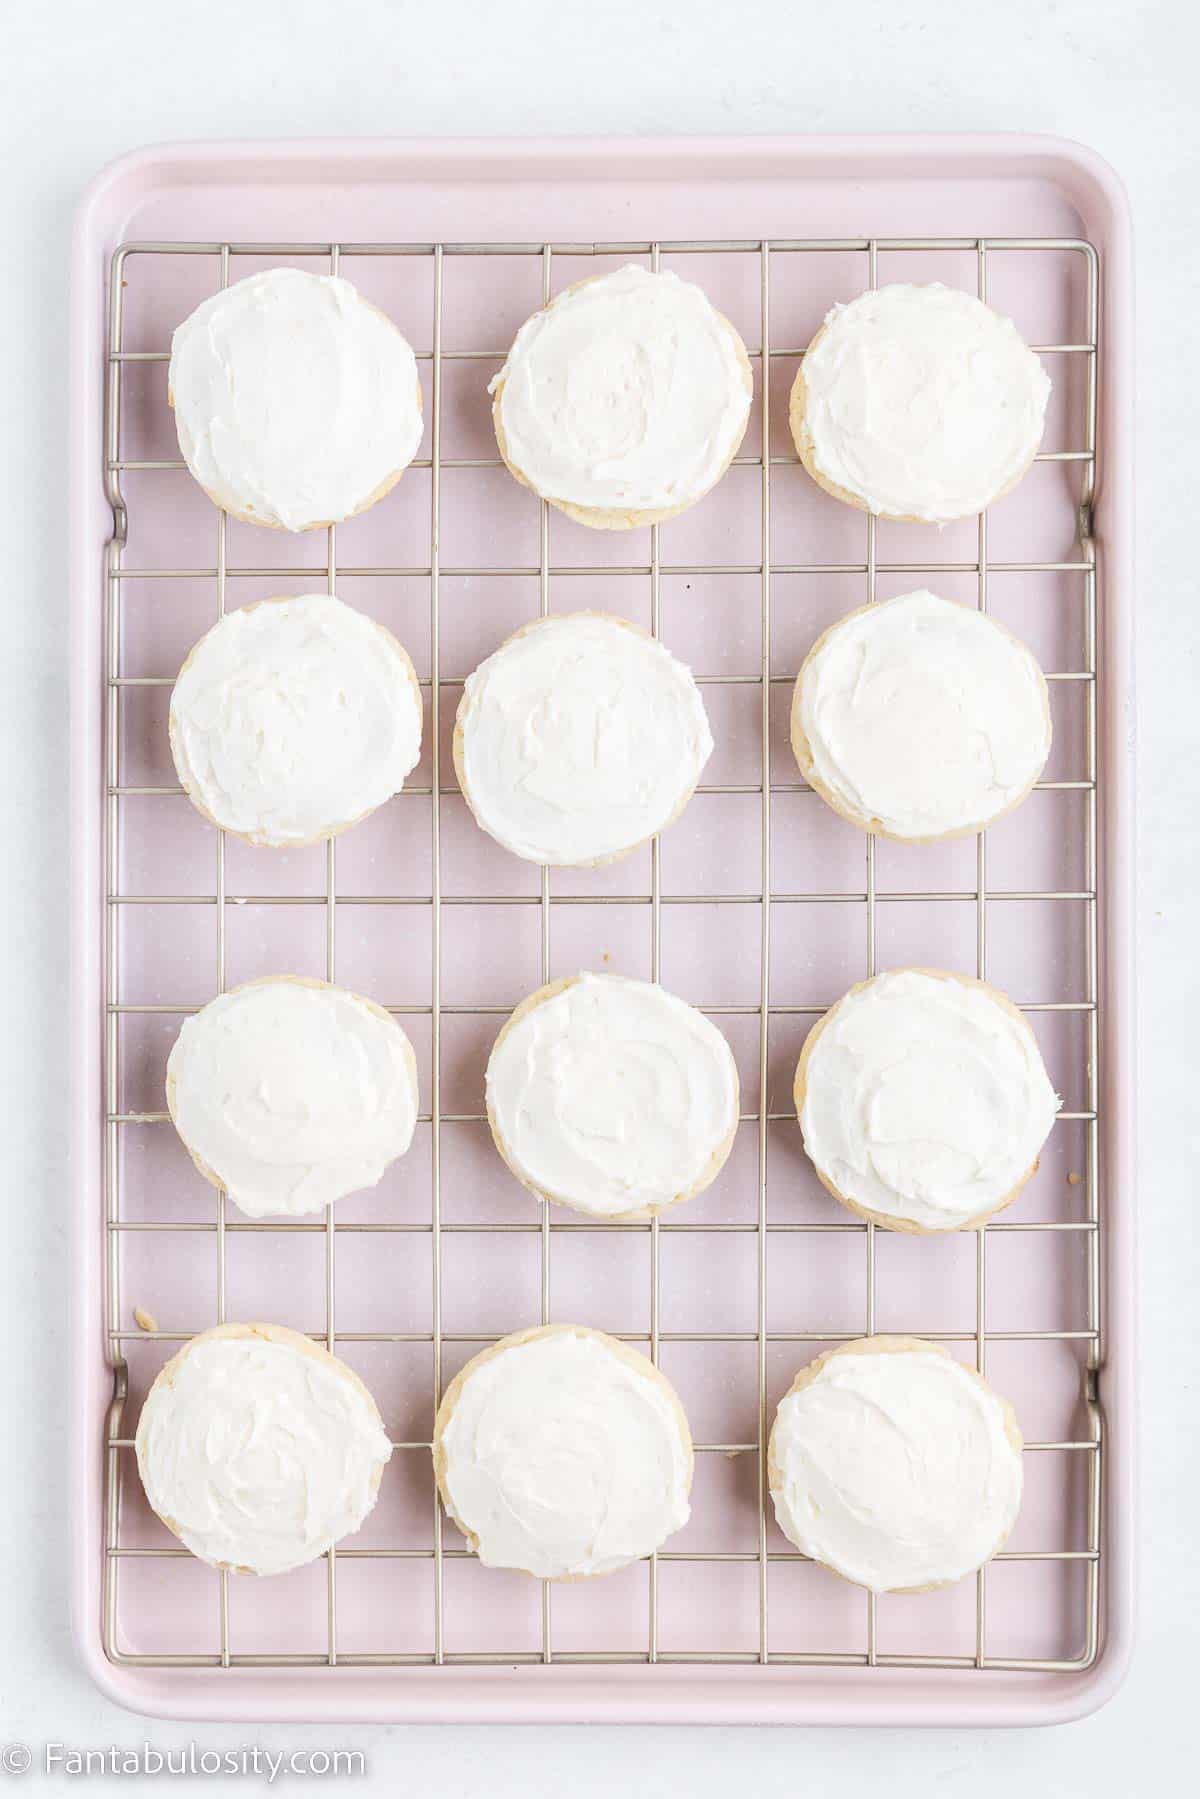 Frosted cookies on wire rack.